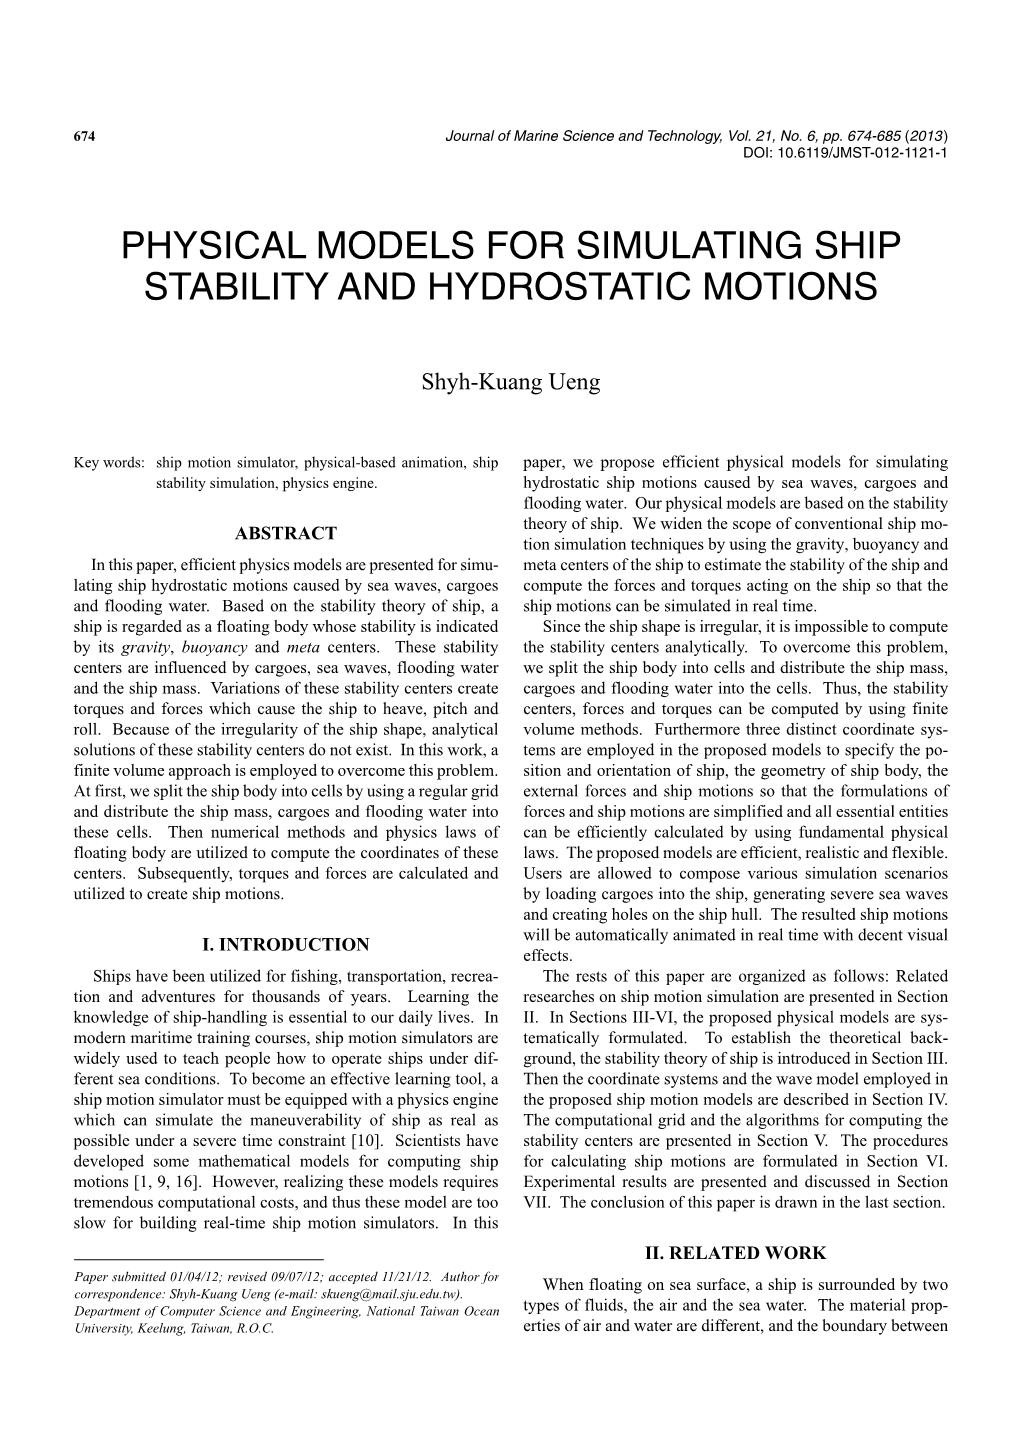 Physical Models for Simulating Ship Stability and Hydrostatic Motions